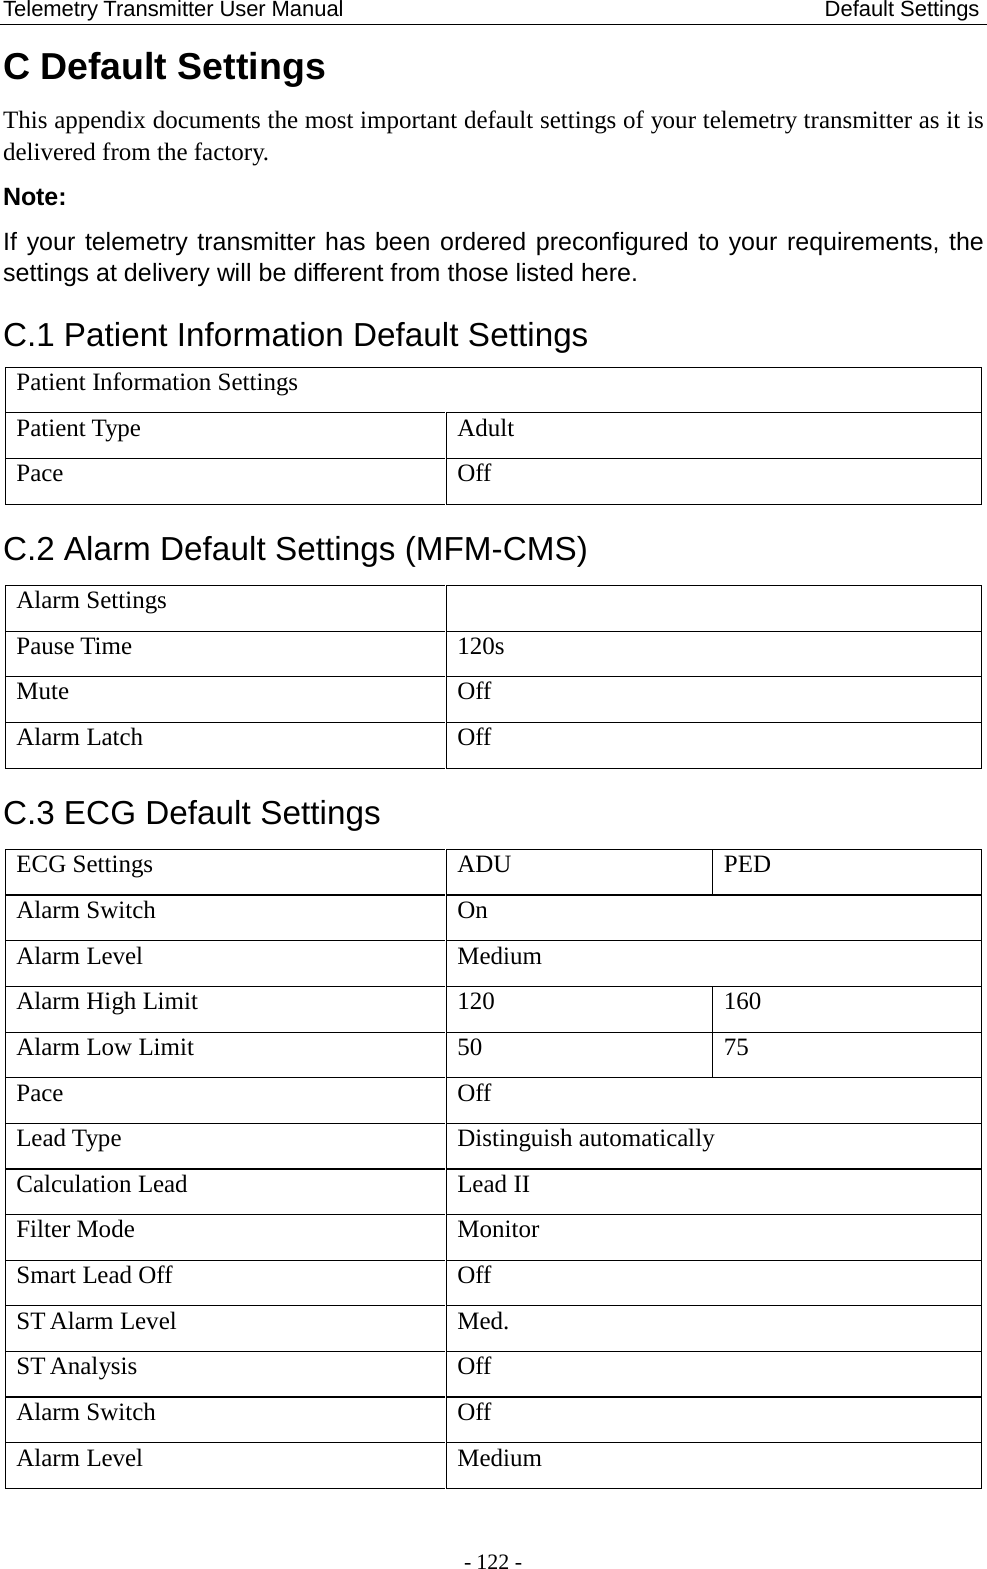 Telemetry Transmitter User Manual                                            Default Settings C Default Settings This appendix documents the most important default settings of your telemetry transmitter as it is delivered from the factory. Note:   If your telemetry transmitter has been ordered preconfigured to your requirements, the settings at delivery will be different from those listed here. C.1 Patient Information Default Settings Patient Information Settings Patient Type Adult Pace Off C.2 Alarm Default Settings (MFM-CMS) Alarm Settings  Pause Time 120s Mute Off Alarm Latch Off C.3 ECG Default Settings ECG Settings ADU PED Alarm Switch On Alarm Level Medium Alarm High Limit 120 160 Alarm Low Limit 50 75 Pace Off Lead Type   Distinguish automatically Calculation Lead Lead II Filter Mode Monitor Smart Lead Off Off ST Alarm Level Med. ST Analysis Off Alarm Switch Off Alarm Level Medium - 122 - 